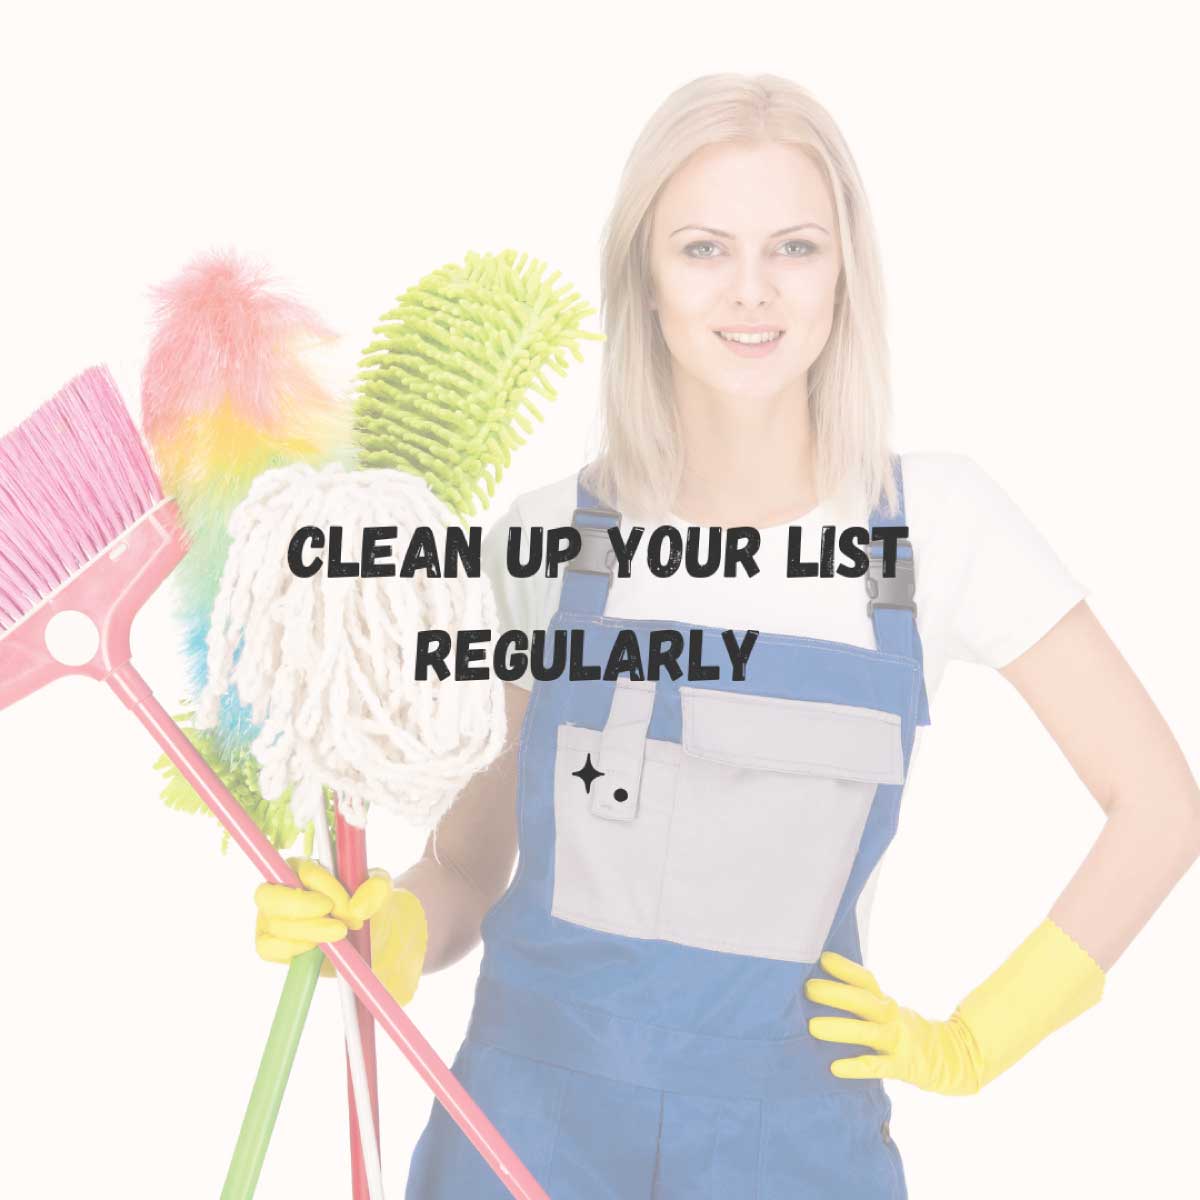 Clean up your list regularly, woman standing with cleaning gloves on and cleaning supplies in her hand.